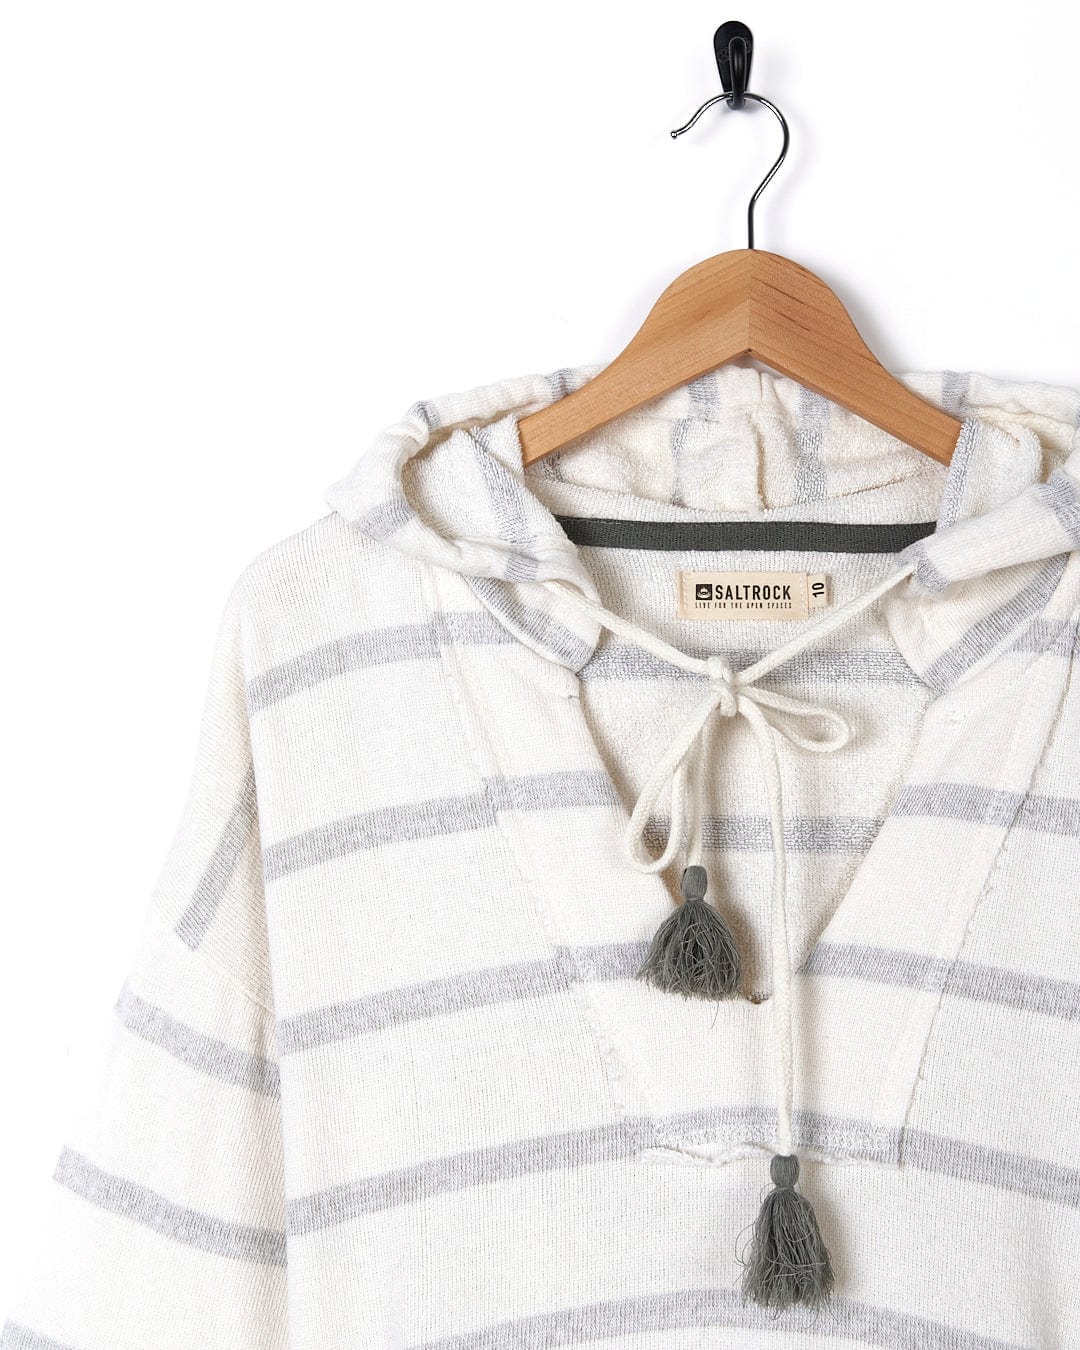 A Kennedy - Womens Pop Hoodie - Cream from Saltrock, white and grey striped, hanging on a hanger.